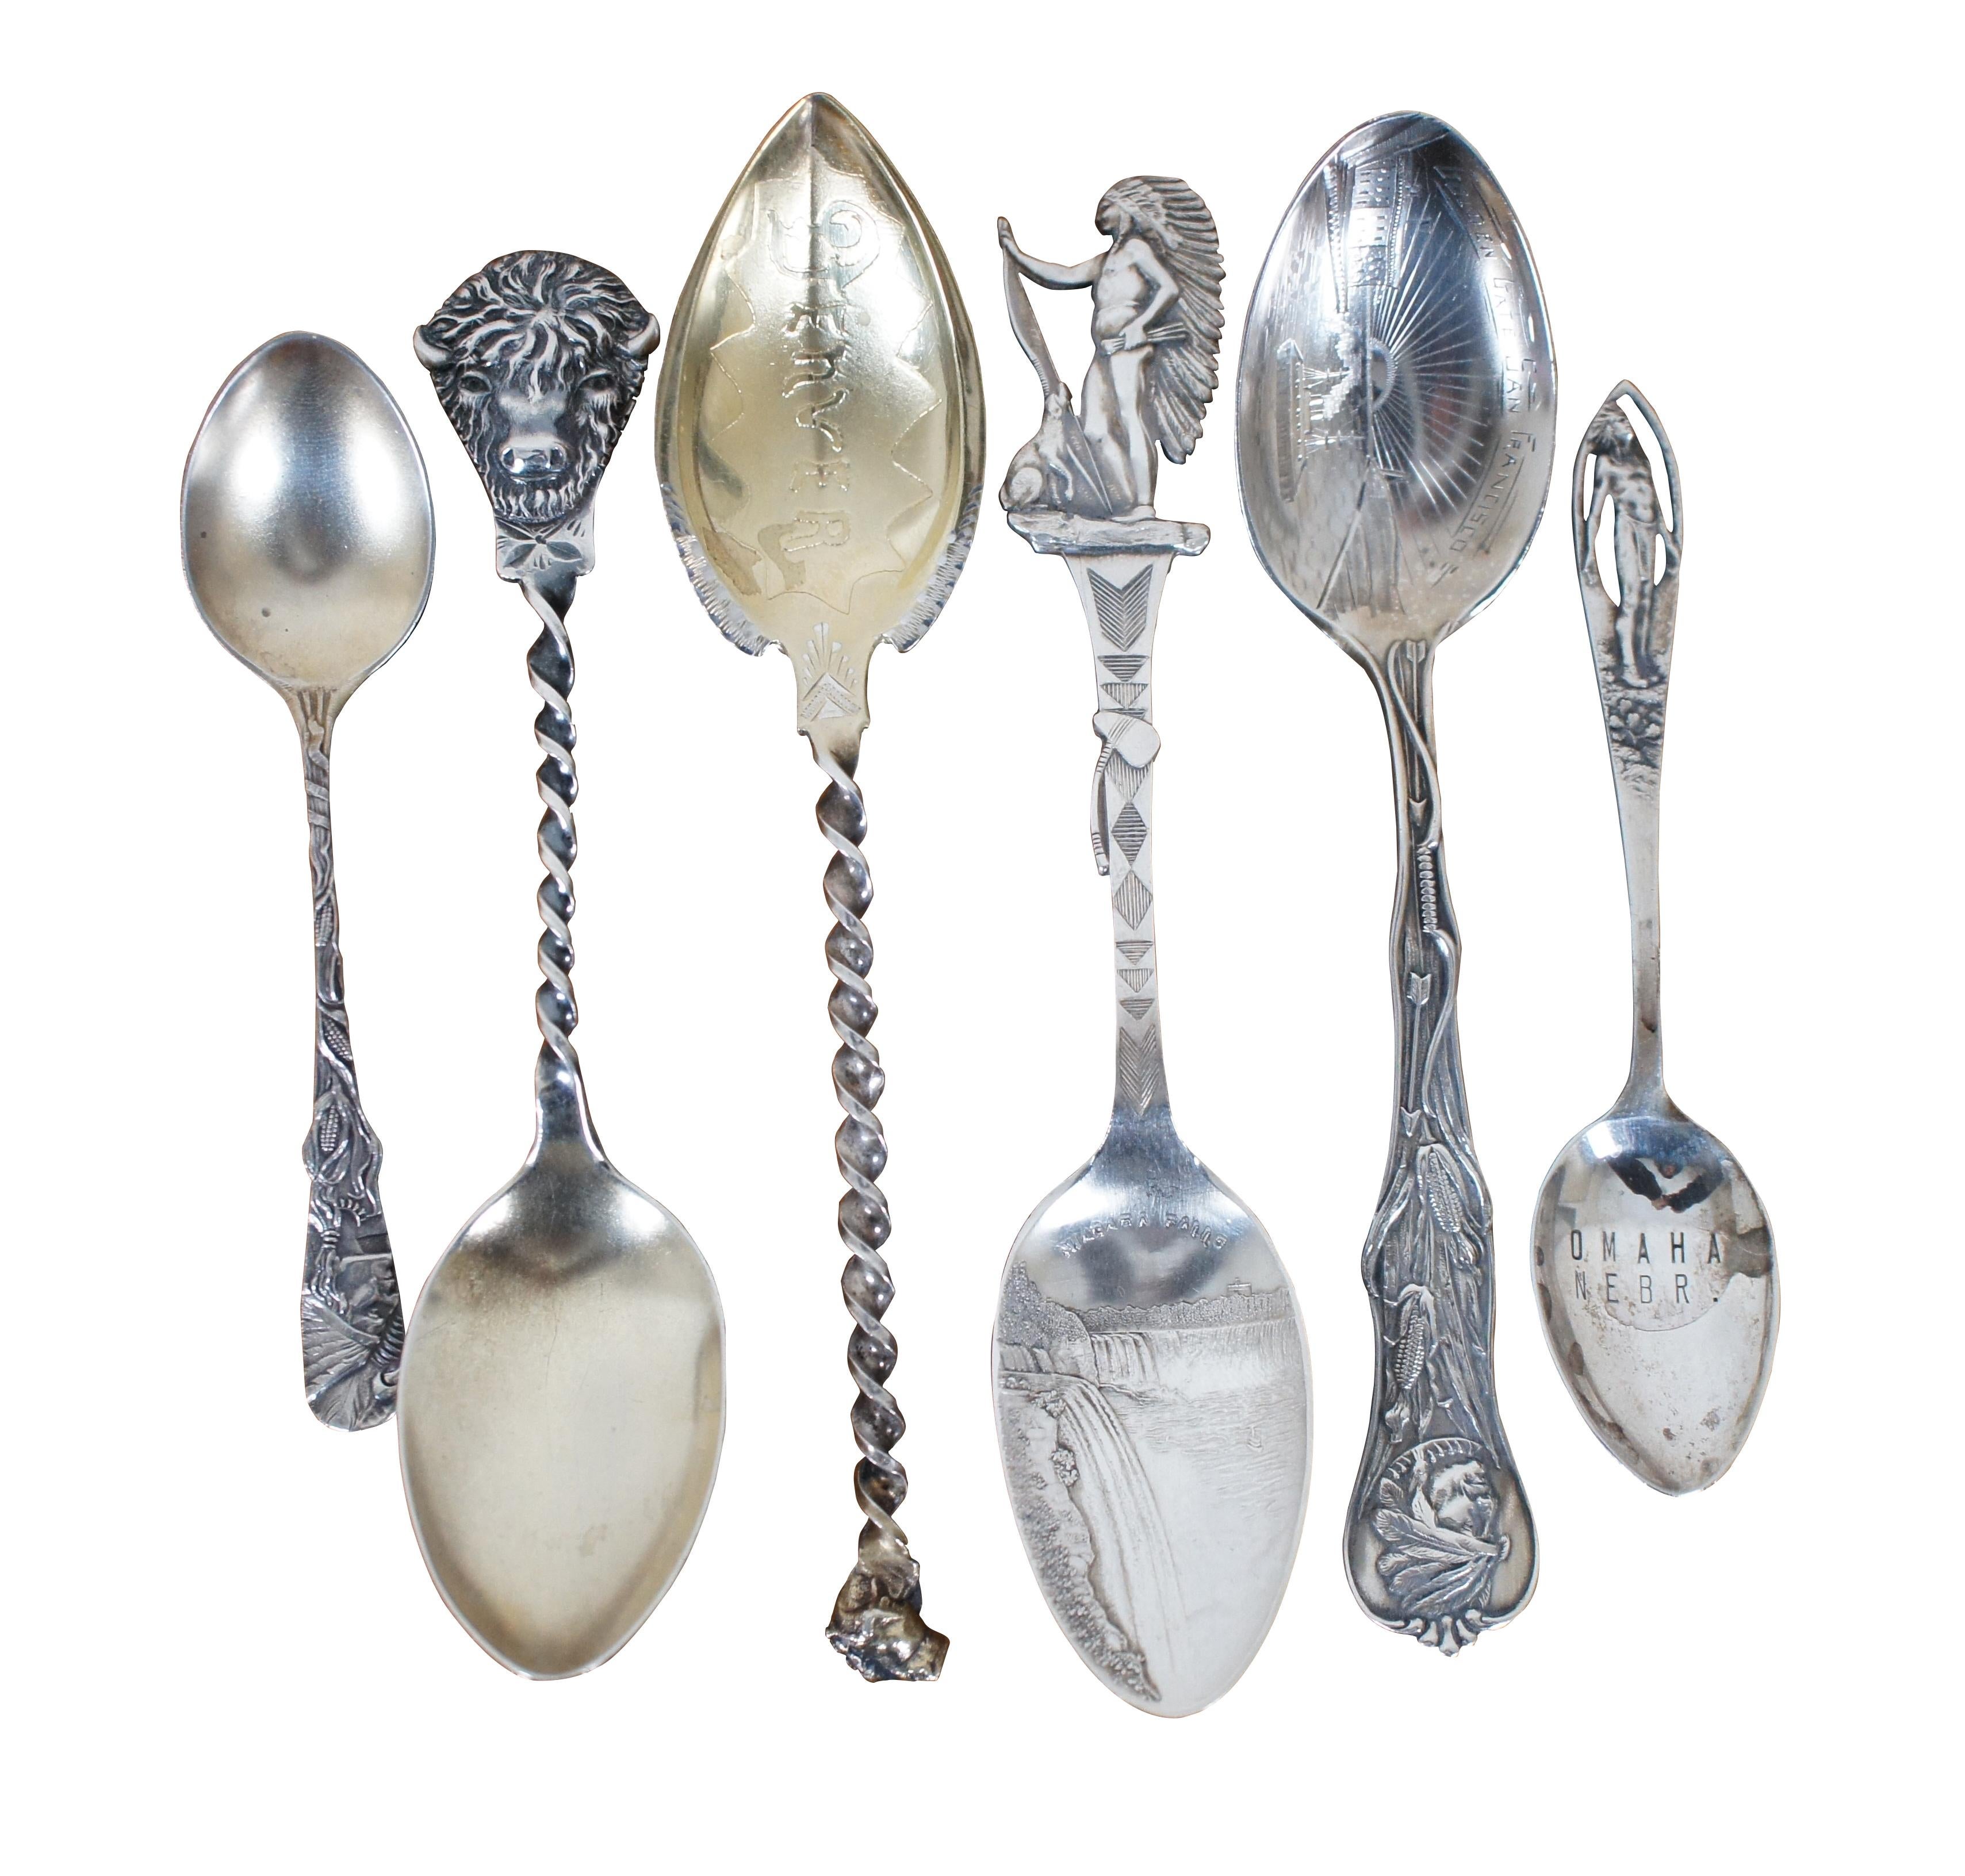 Lot of 6 antique / vintage sterling silver Western souvenir spoons featuring Native American figures / motifs. Makers include Paye & Baker, Colorado Silver, Lunt Silversmiths, Mechanics Silver Co, and Charles M. Robbins.

Largest - 5.625” x 1.25”